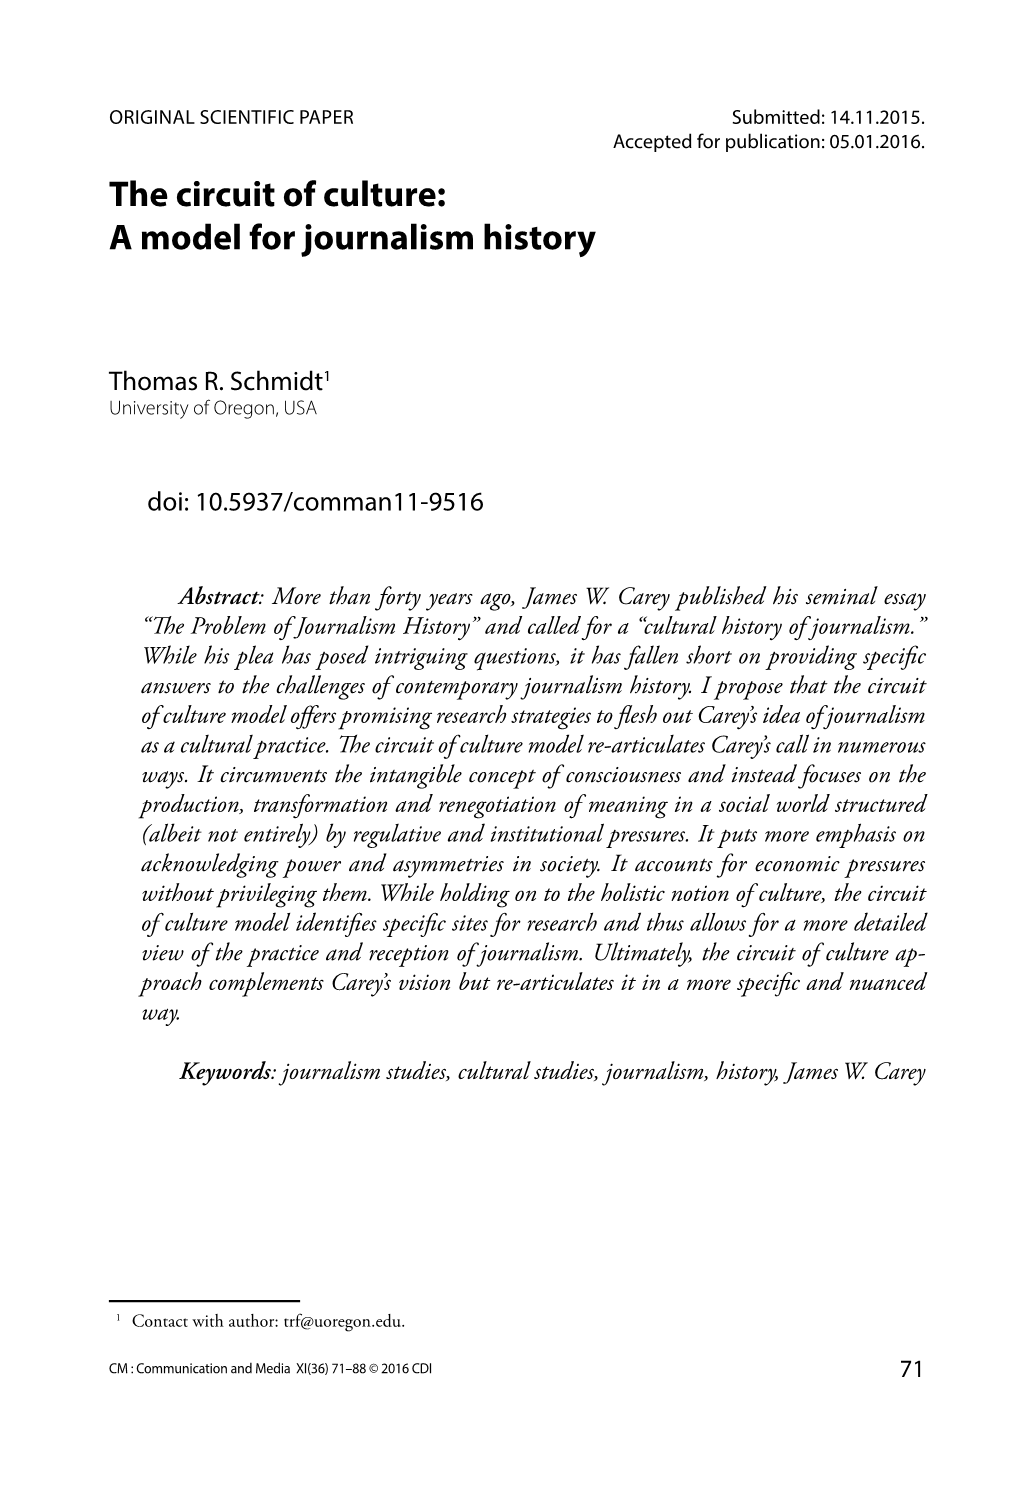 The Circuit of Culture: a Model for Journalism History